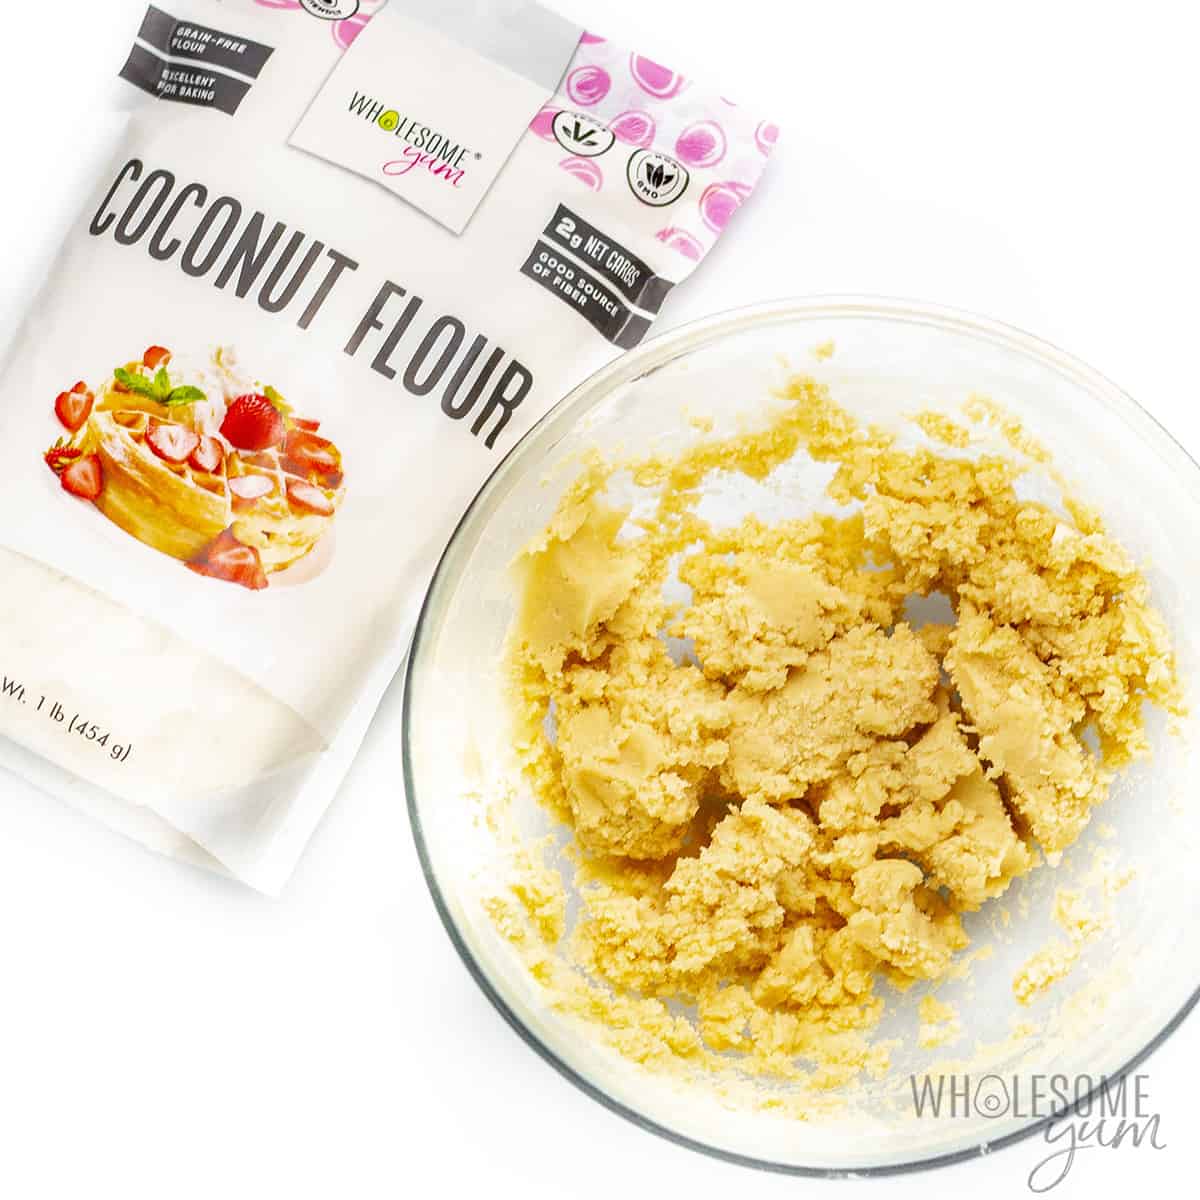 Cookie dough in a bowl next to Wholesome Yum Coconut Flour bag.